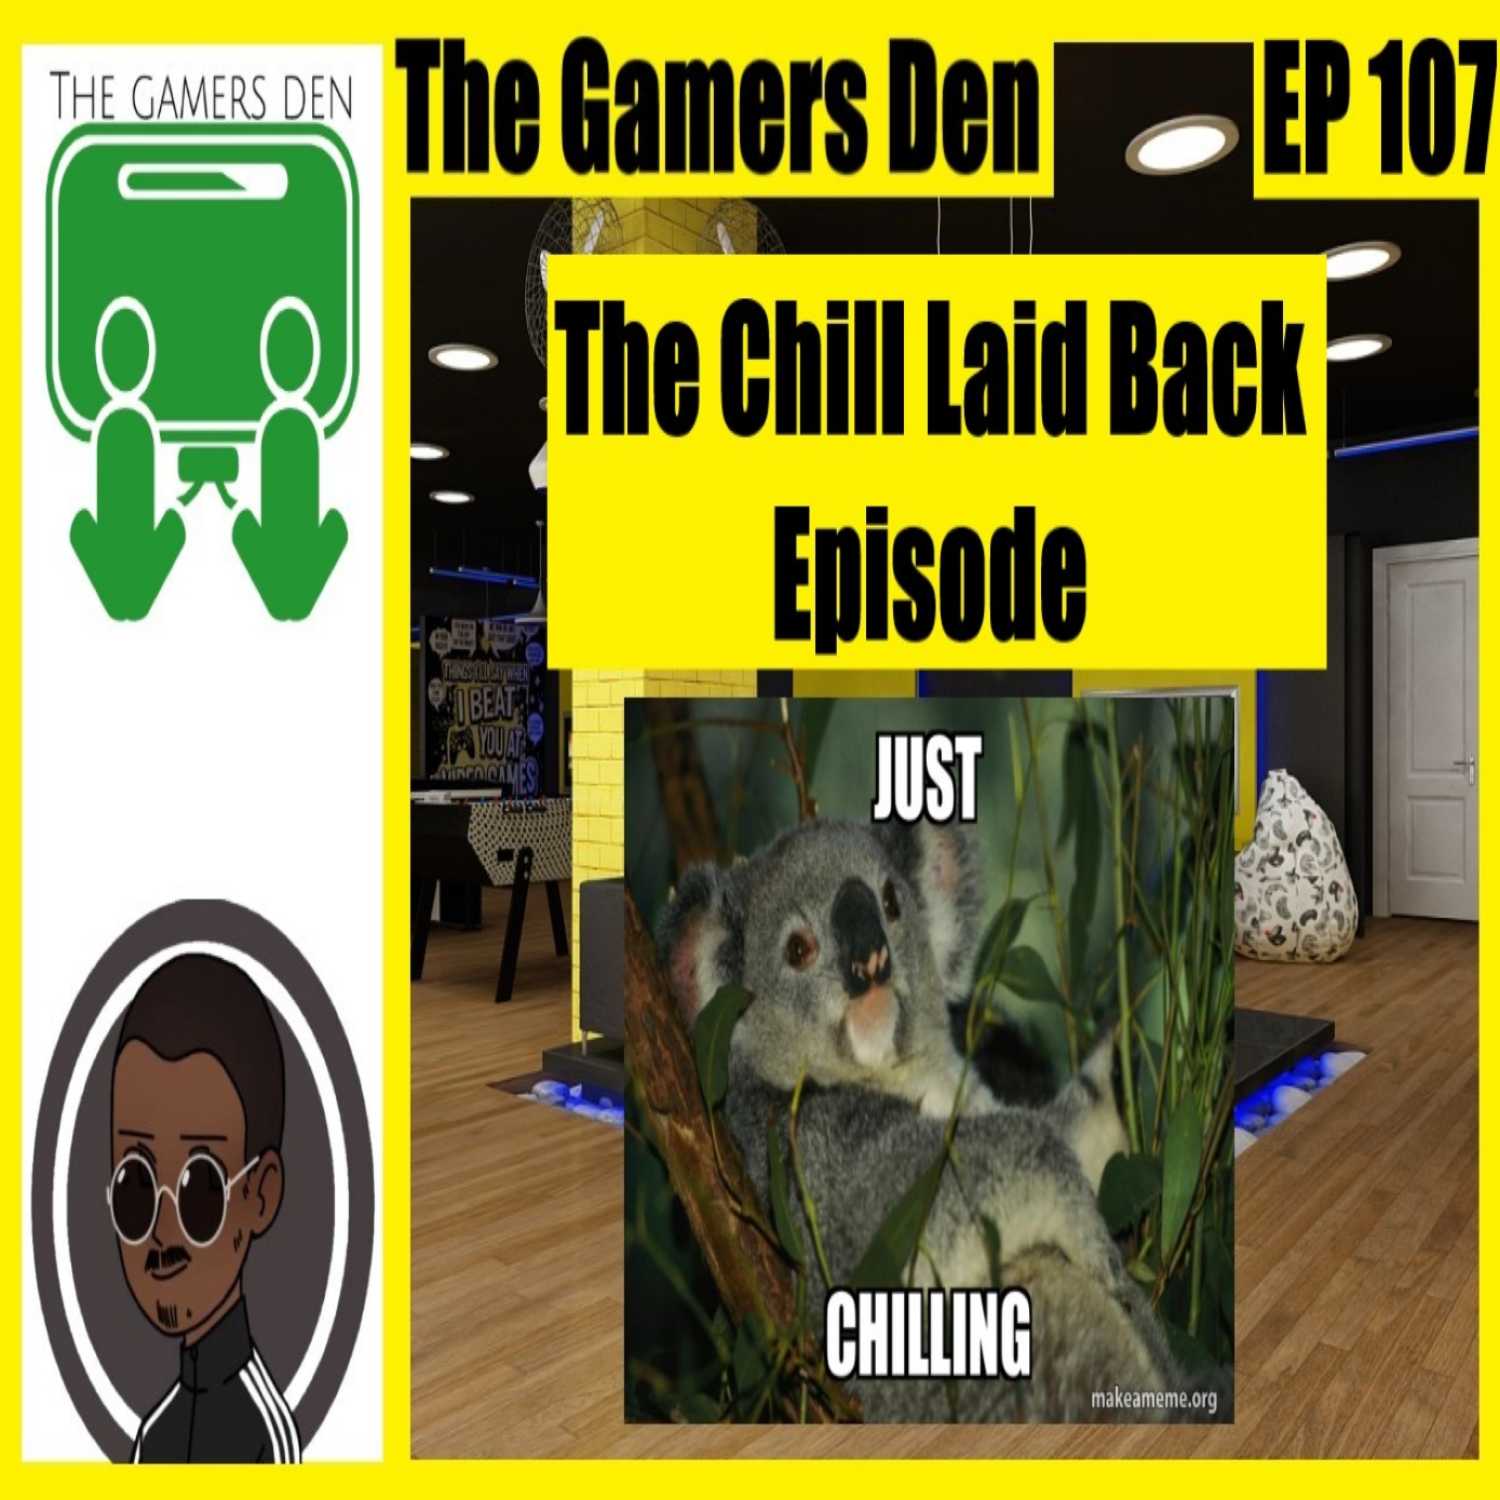 The Chill Laid Back Episode